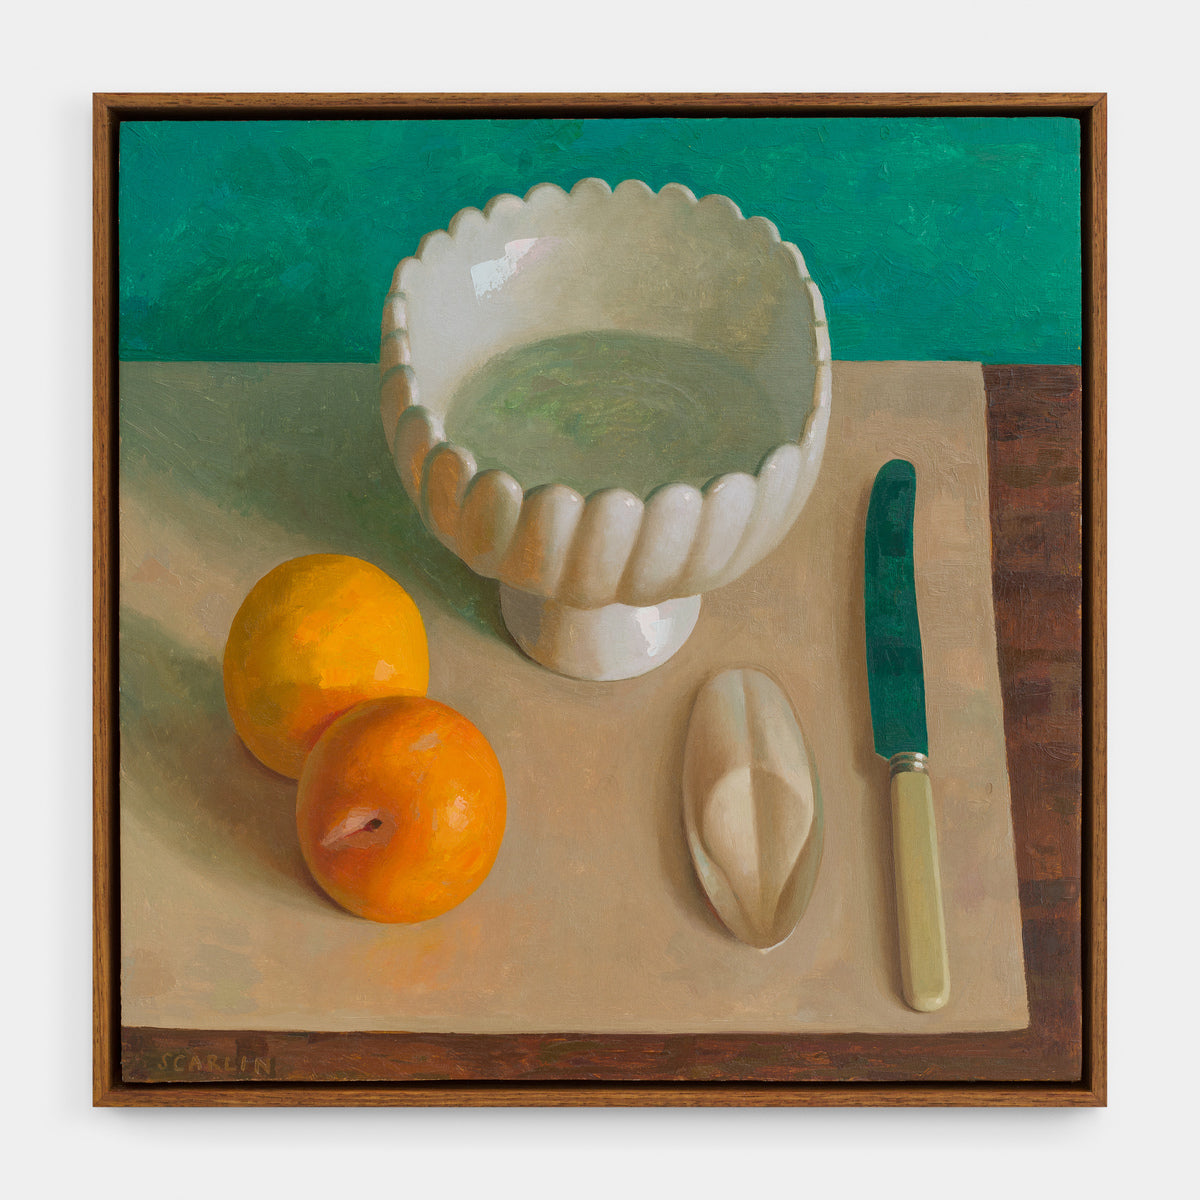 Yellow Plums, Cuttlebone, Bowl and Knife (Green Altar)